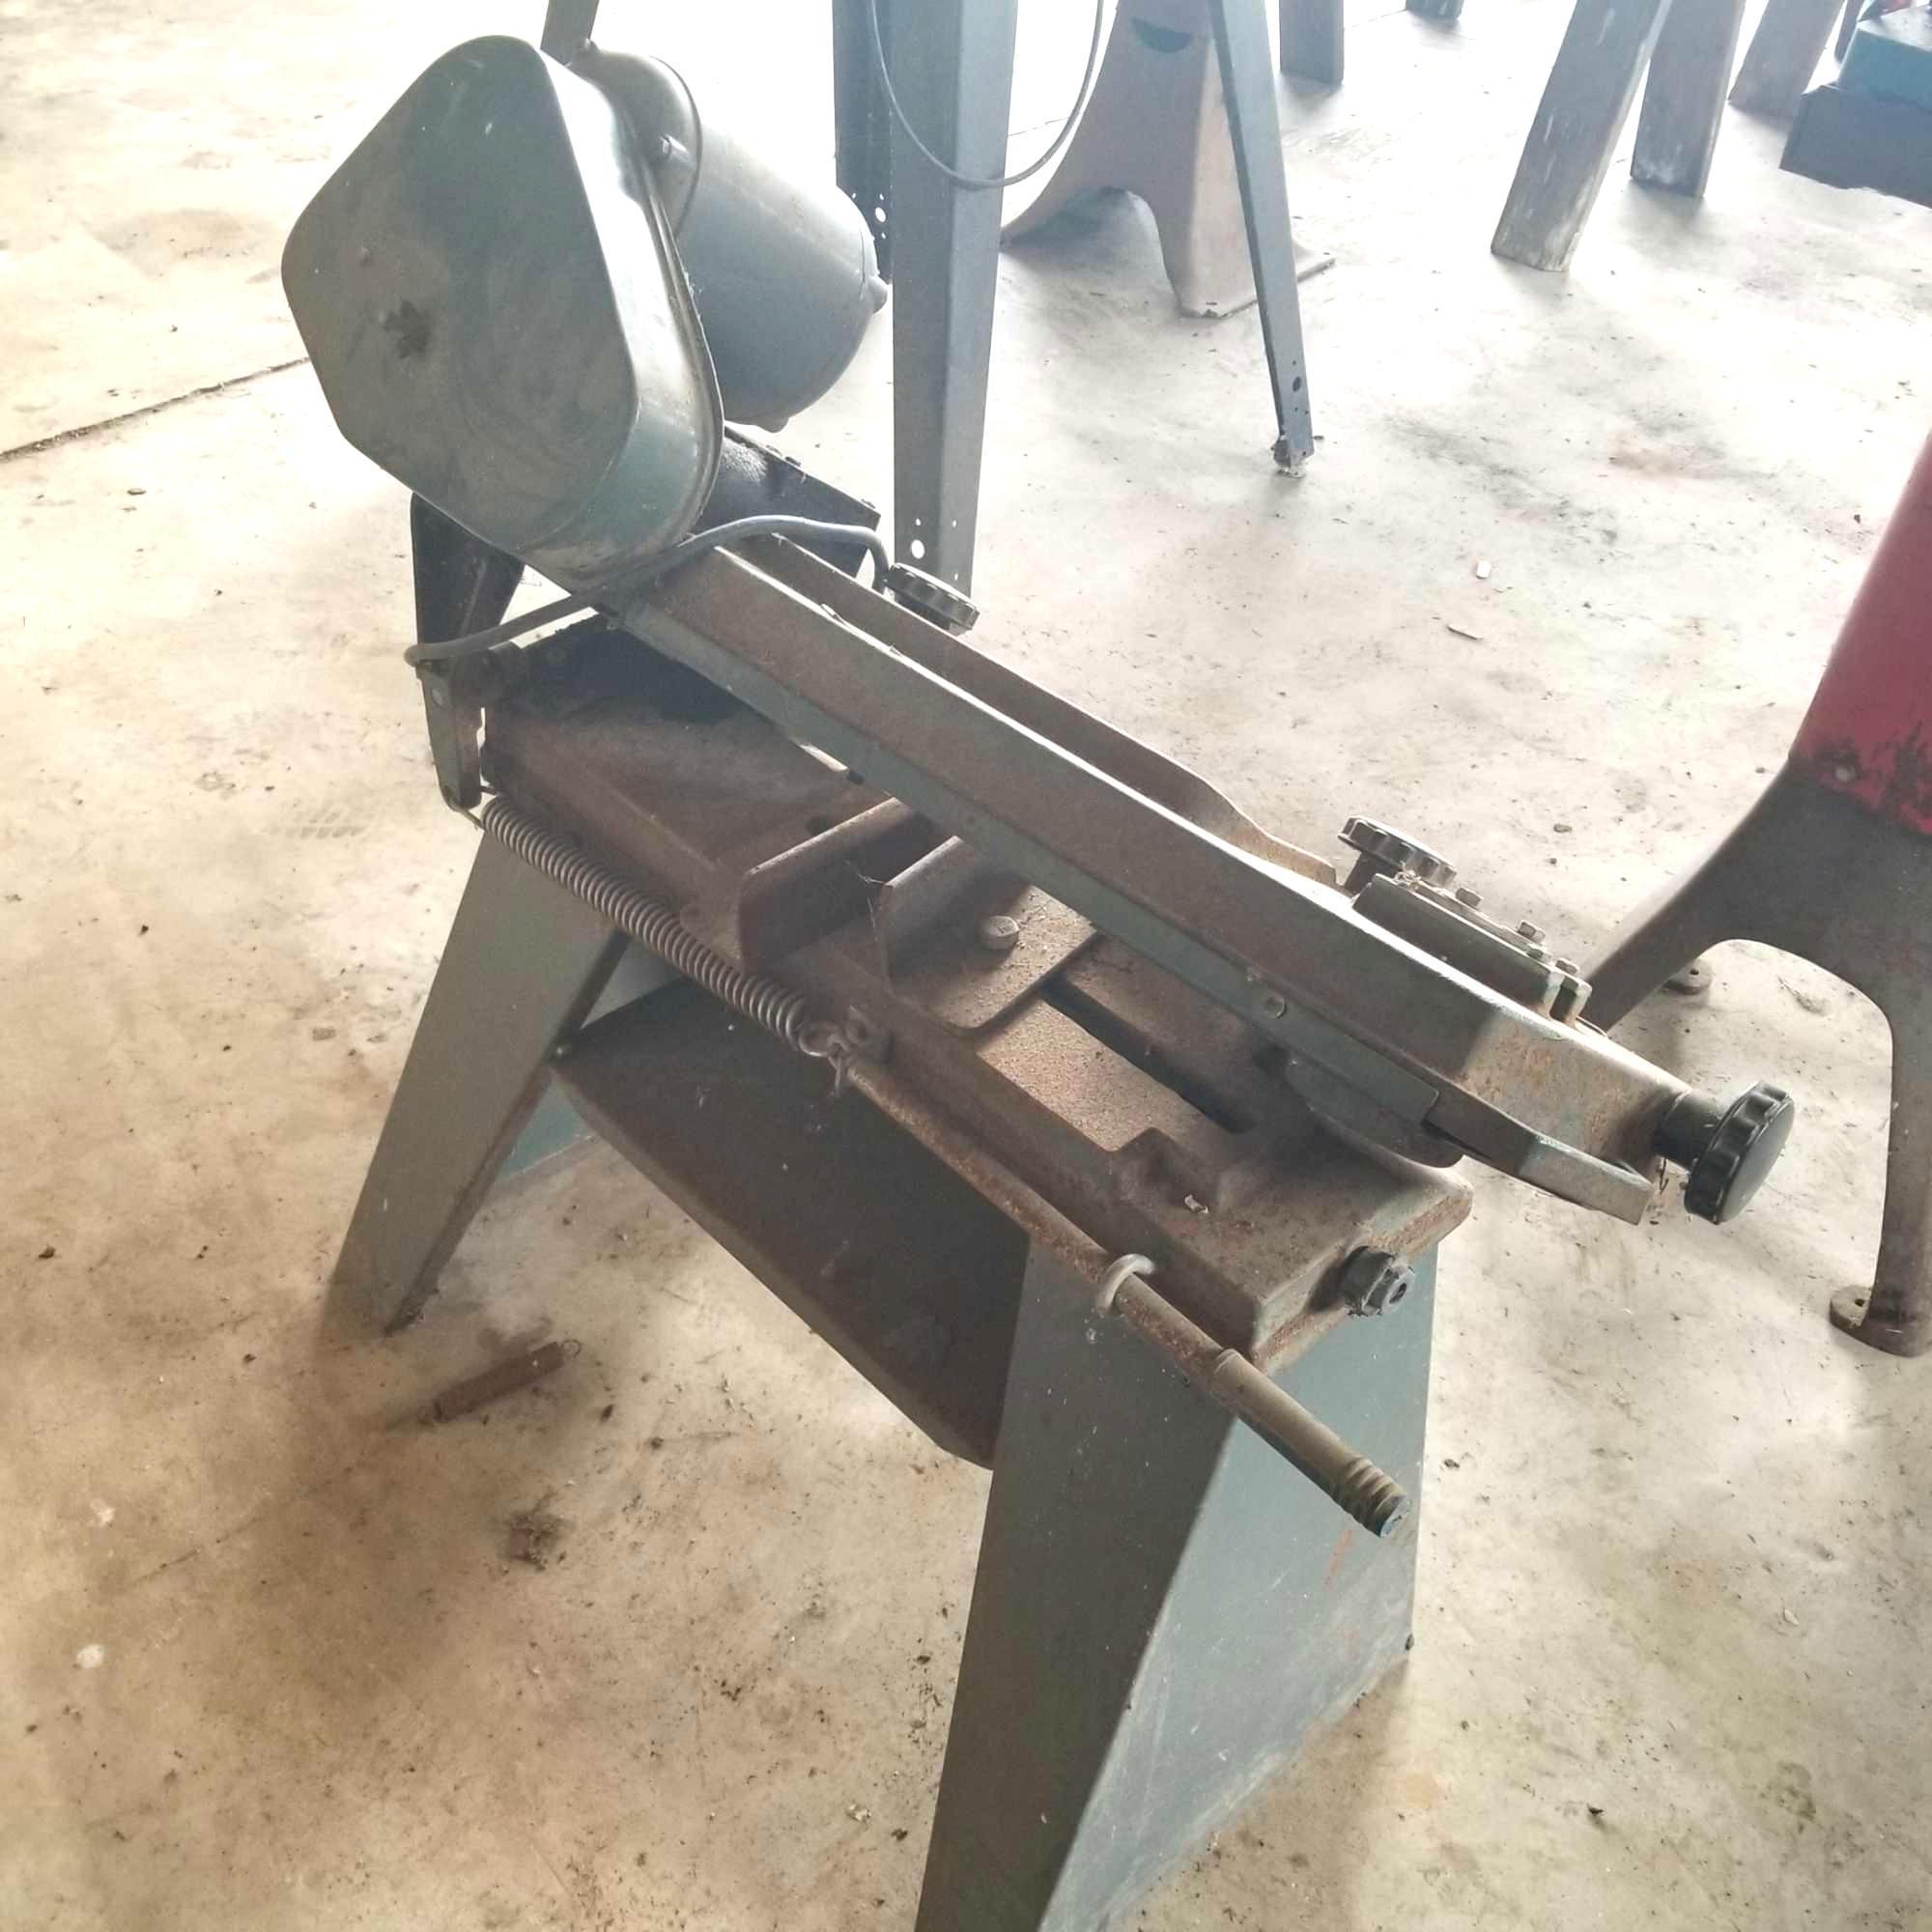 Duracraft Heavy Duty Metal Band Saw with Stand